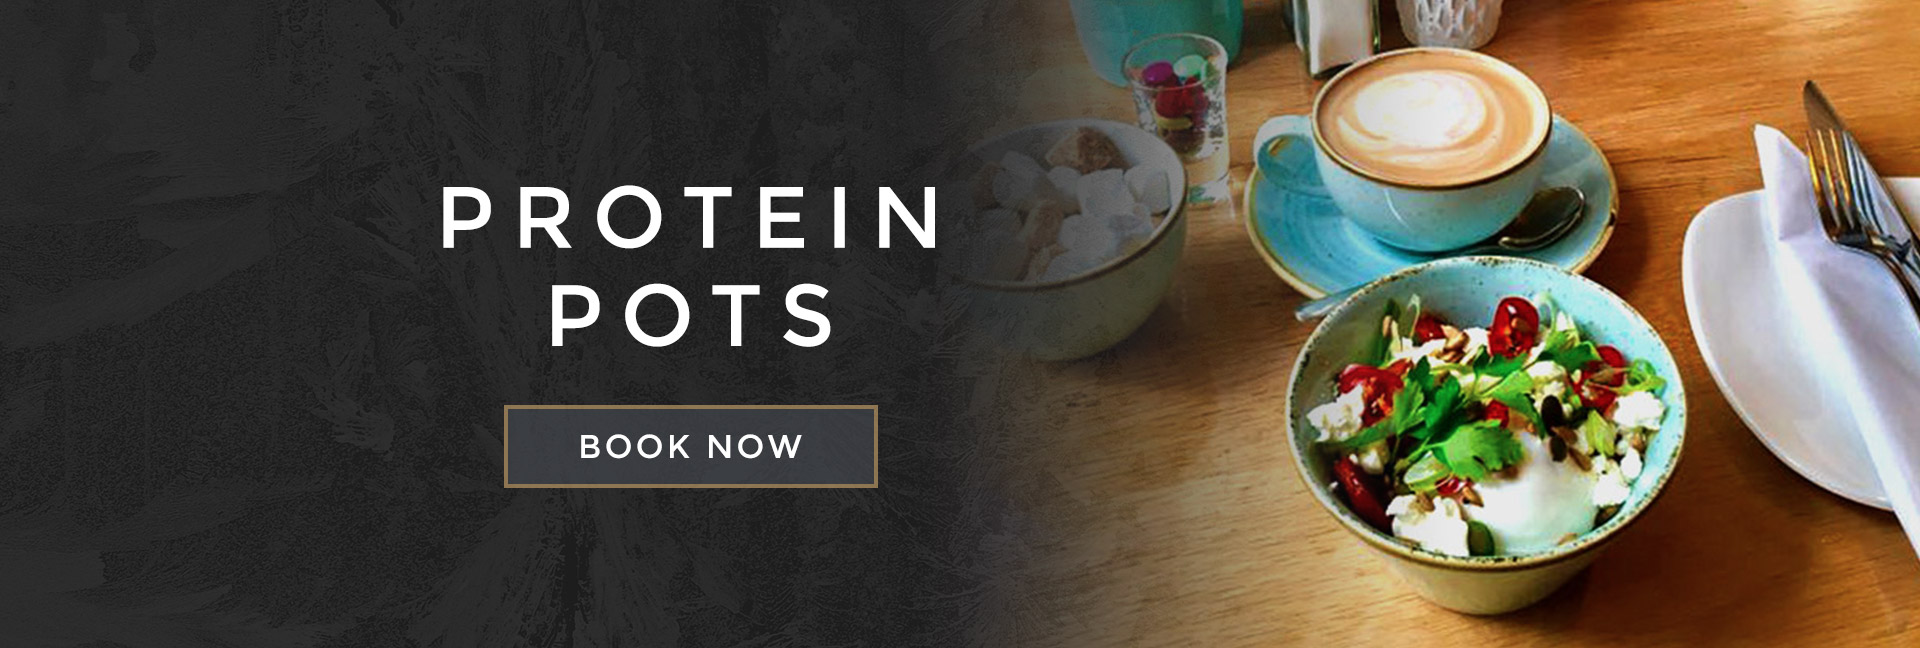 Protein pots at All Bar One Aberdeen - Book your table